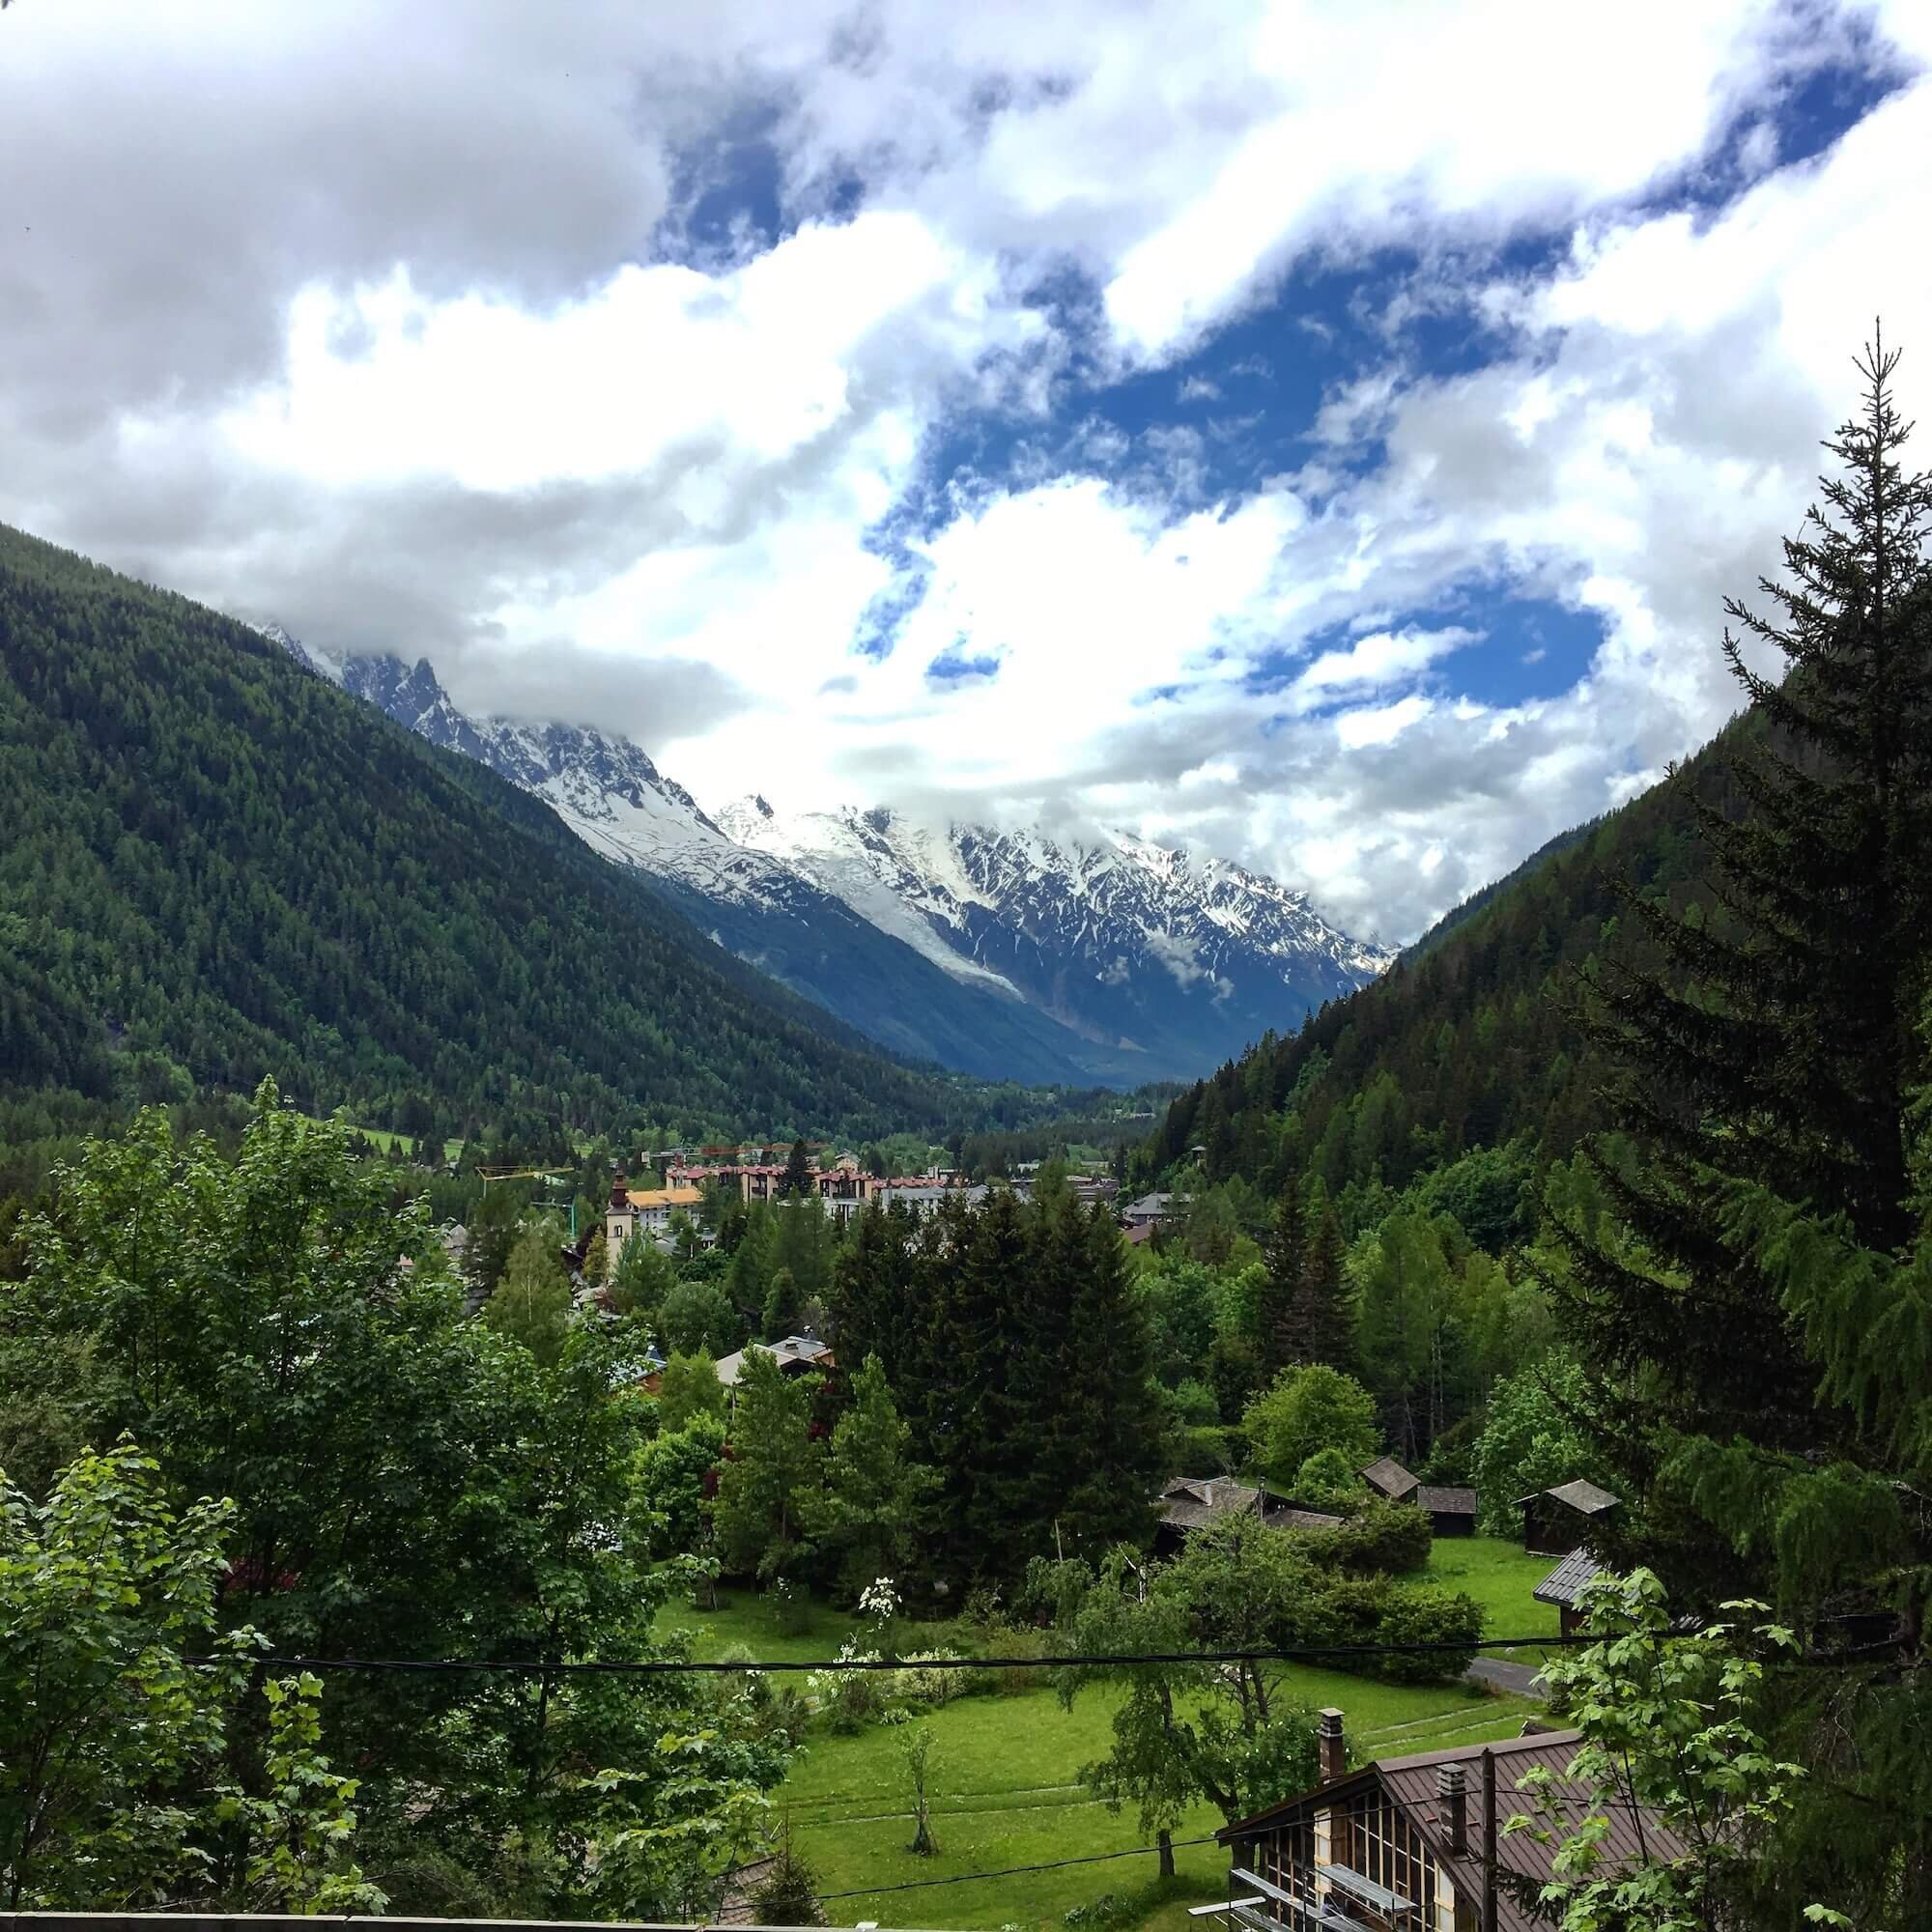 Looking down Chamonix Valley from Montroc